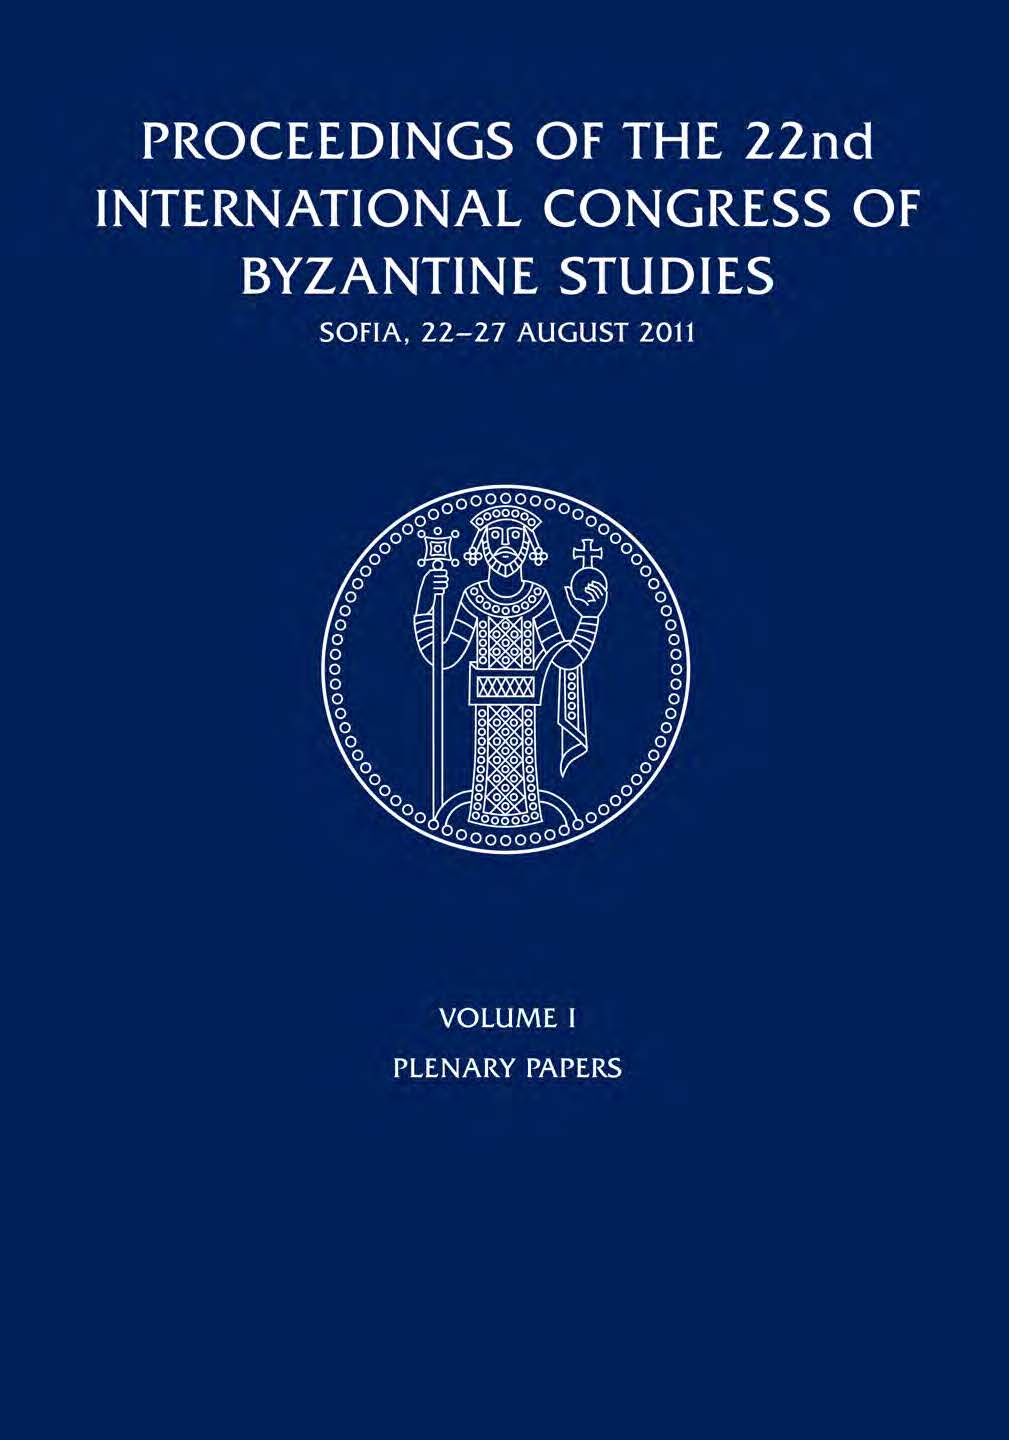 Proceedings of the 22nd International Congress of Byzantine Studies. Sofia, 22–27 August 2011. Volume I, Plenary Papers